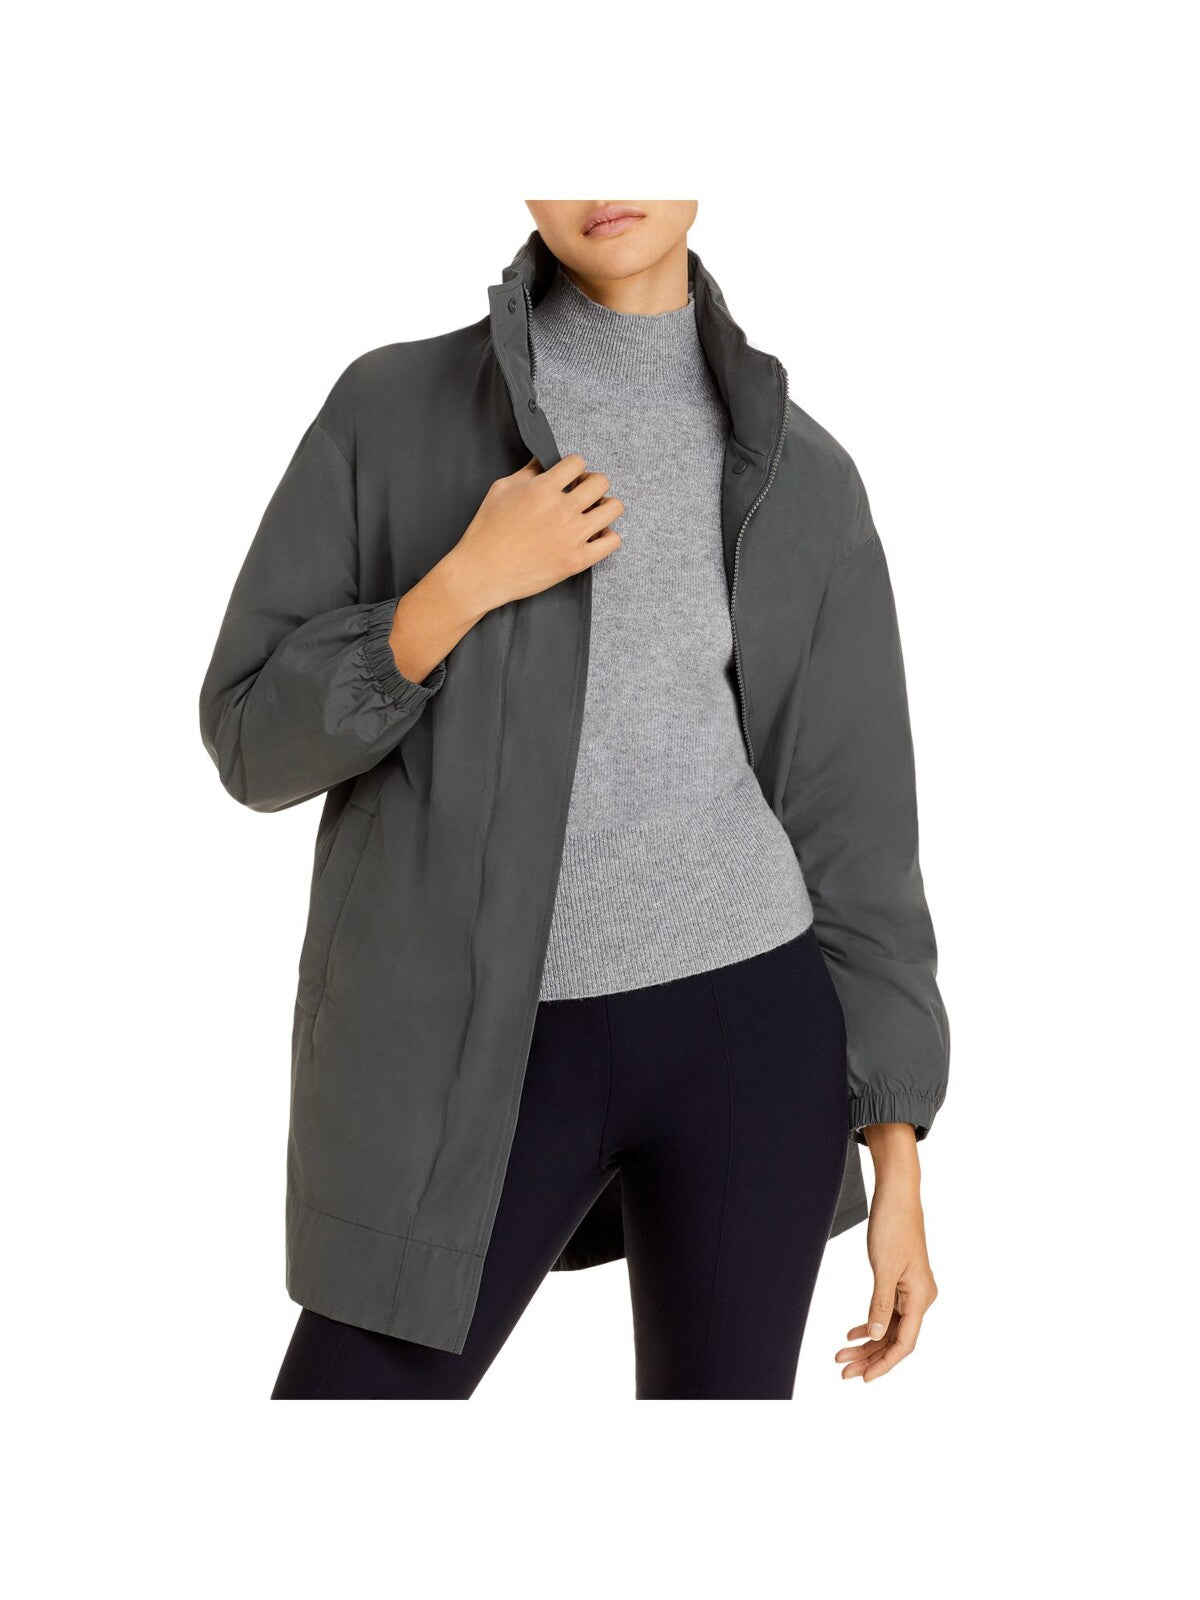 EILEEN FISHER Womens Gray Pocketed Packable Hood Snap Close Stand Collar Zip Up Jacket L